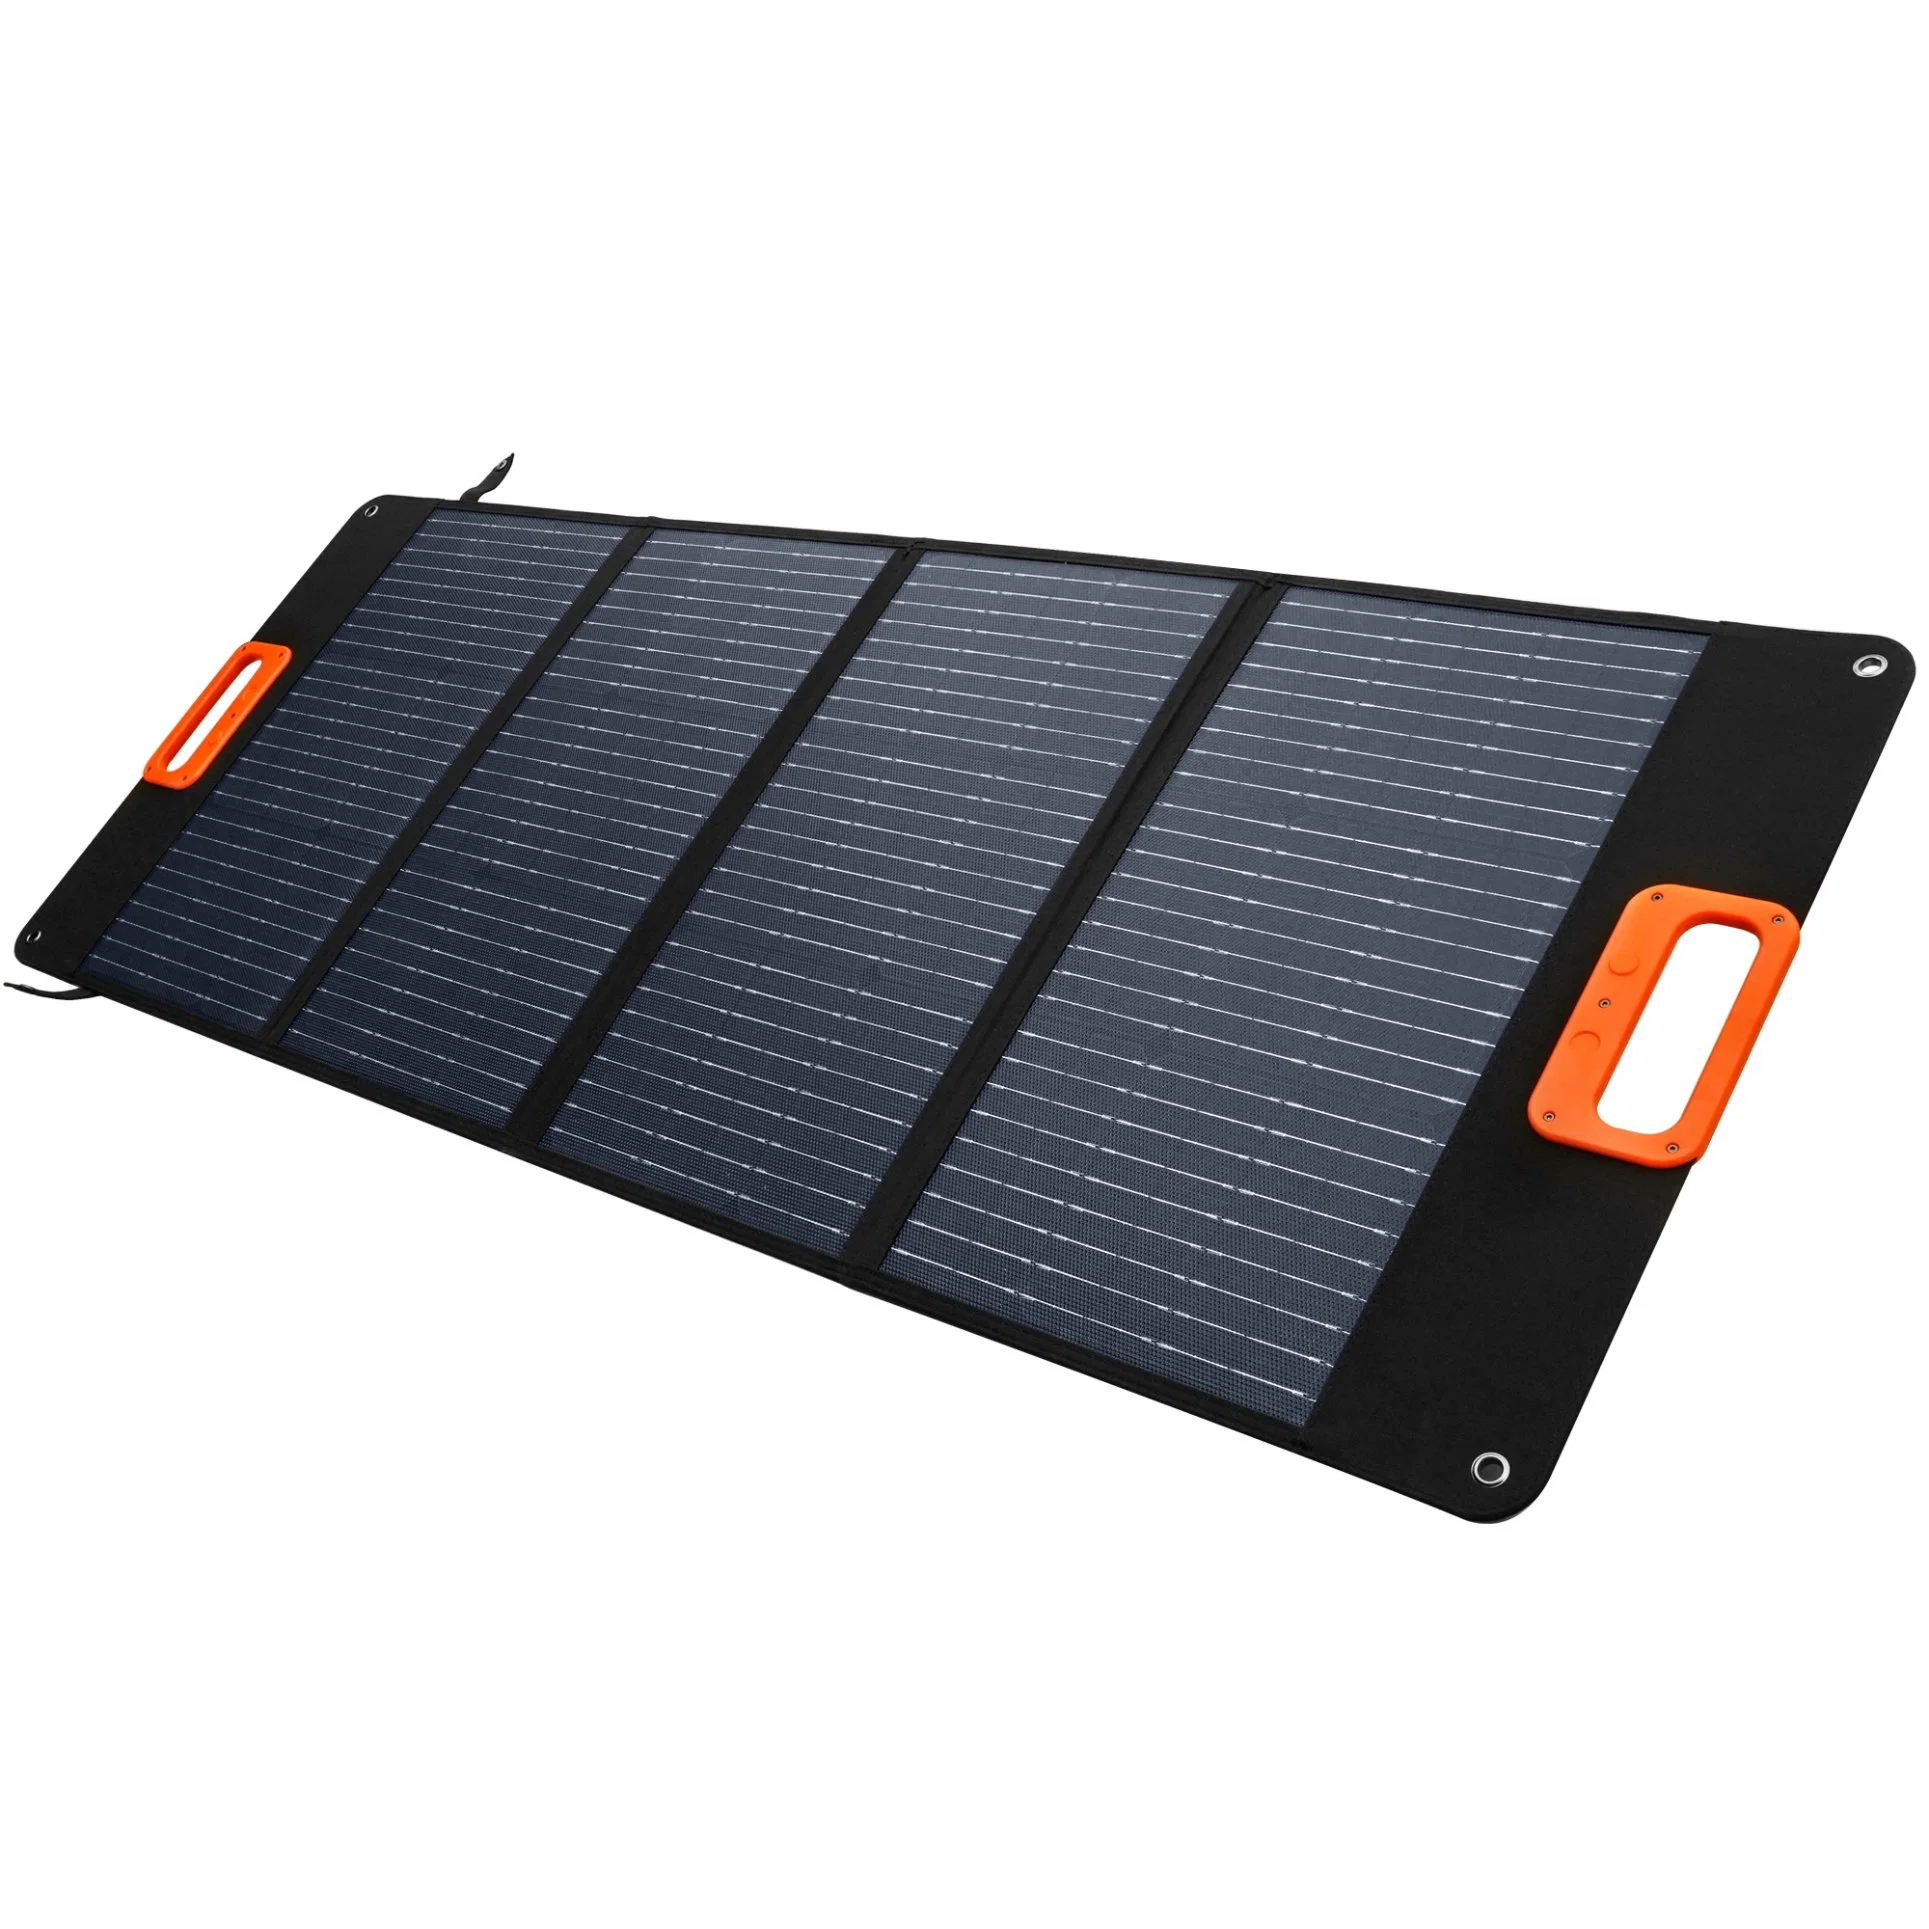 60W 100W 200W 400W Portable Foldable Portatil Folding Tablet Camping Cell Phone Wholesale/Supplier Outdoor Sun Power Solar Panel